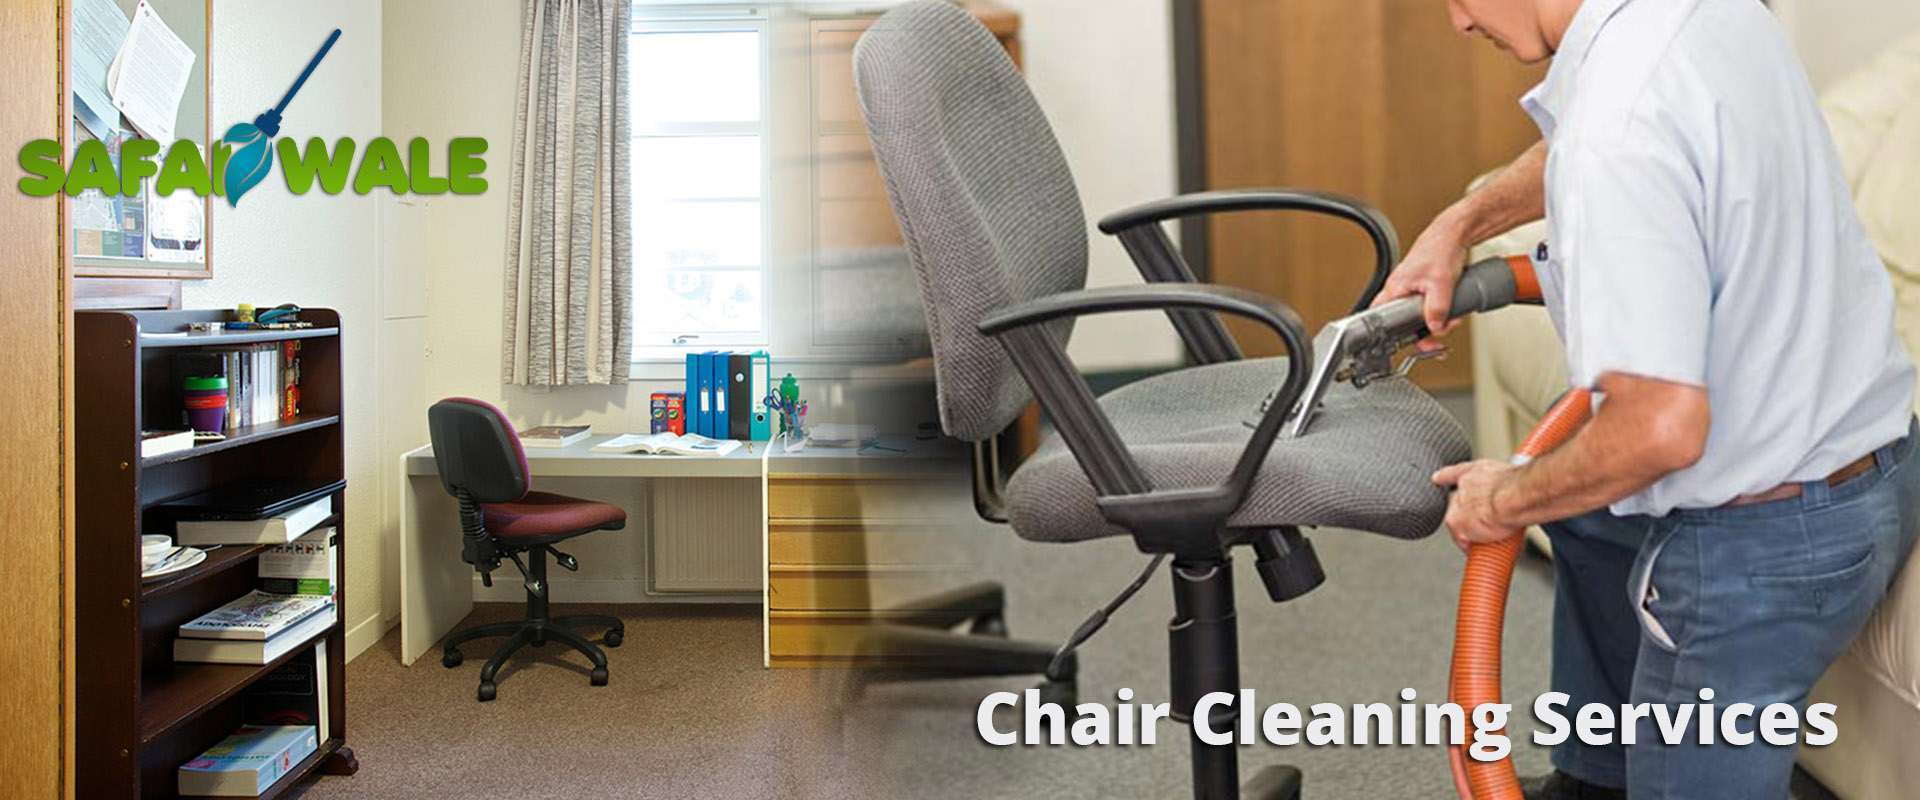 chair cleaning services near me